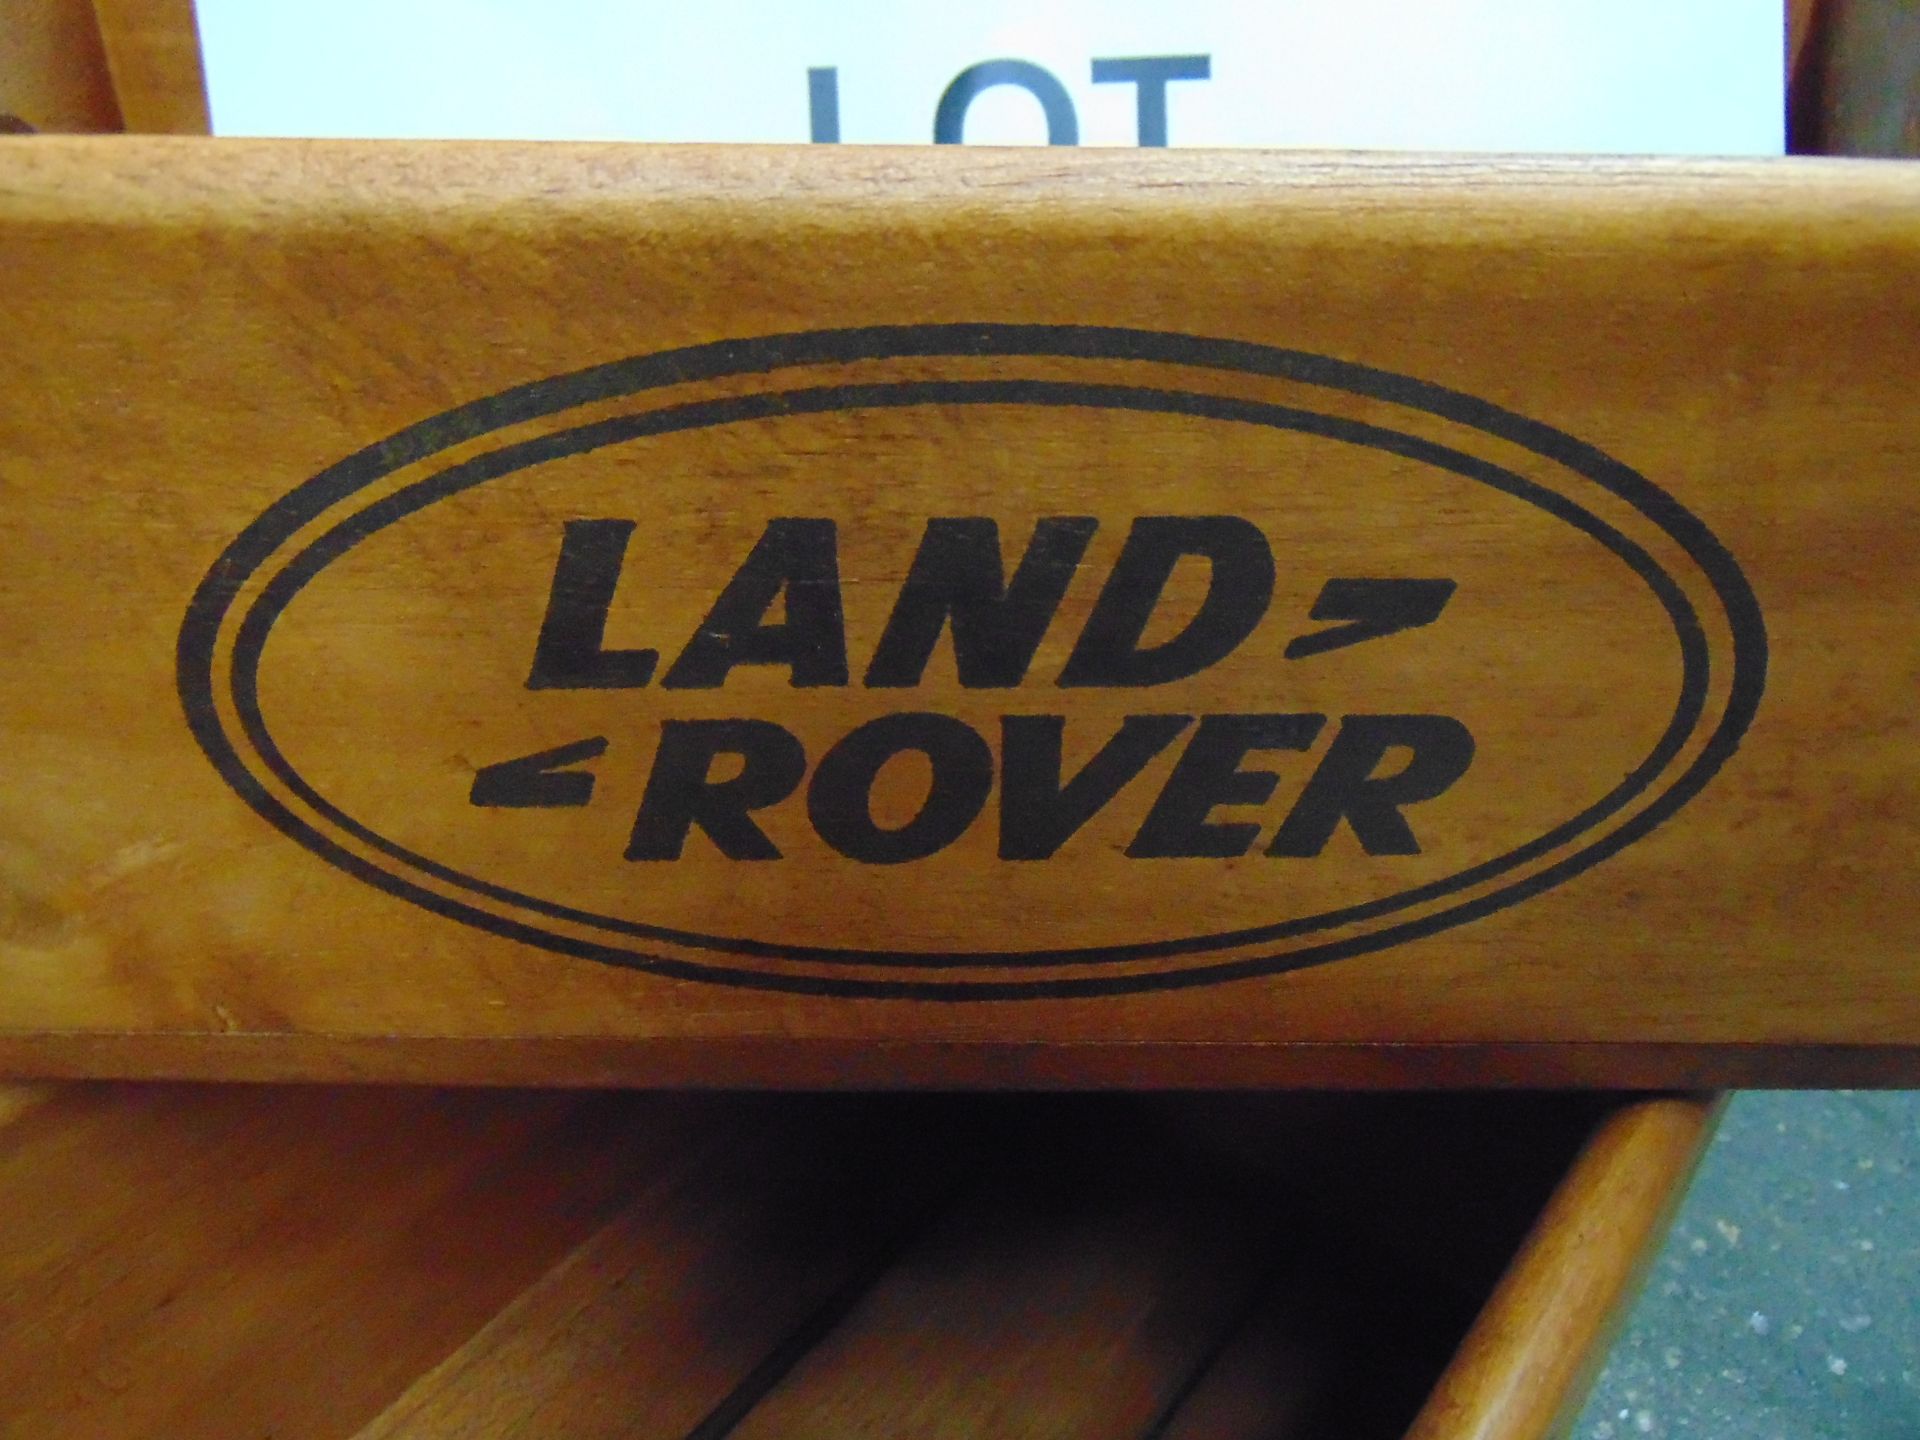 Set of 2 Land Rover Wooden Storage Boxes new unused - Image 2 of 3